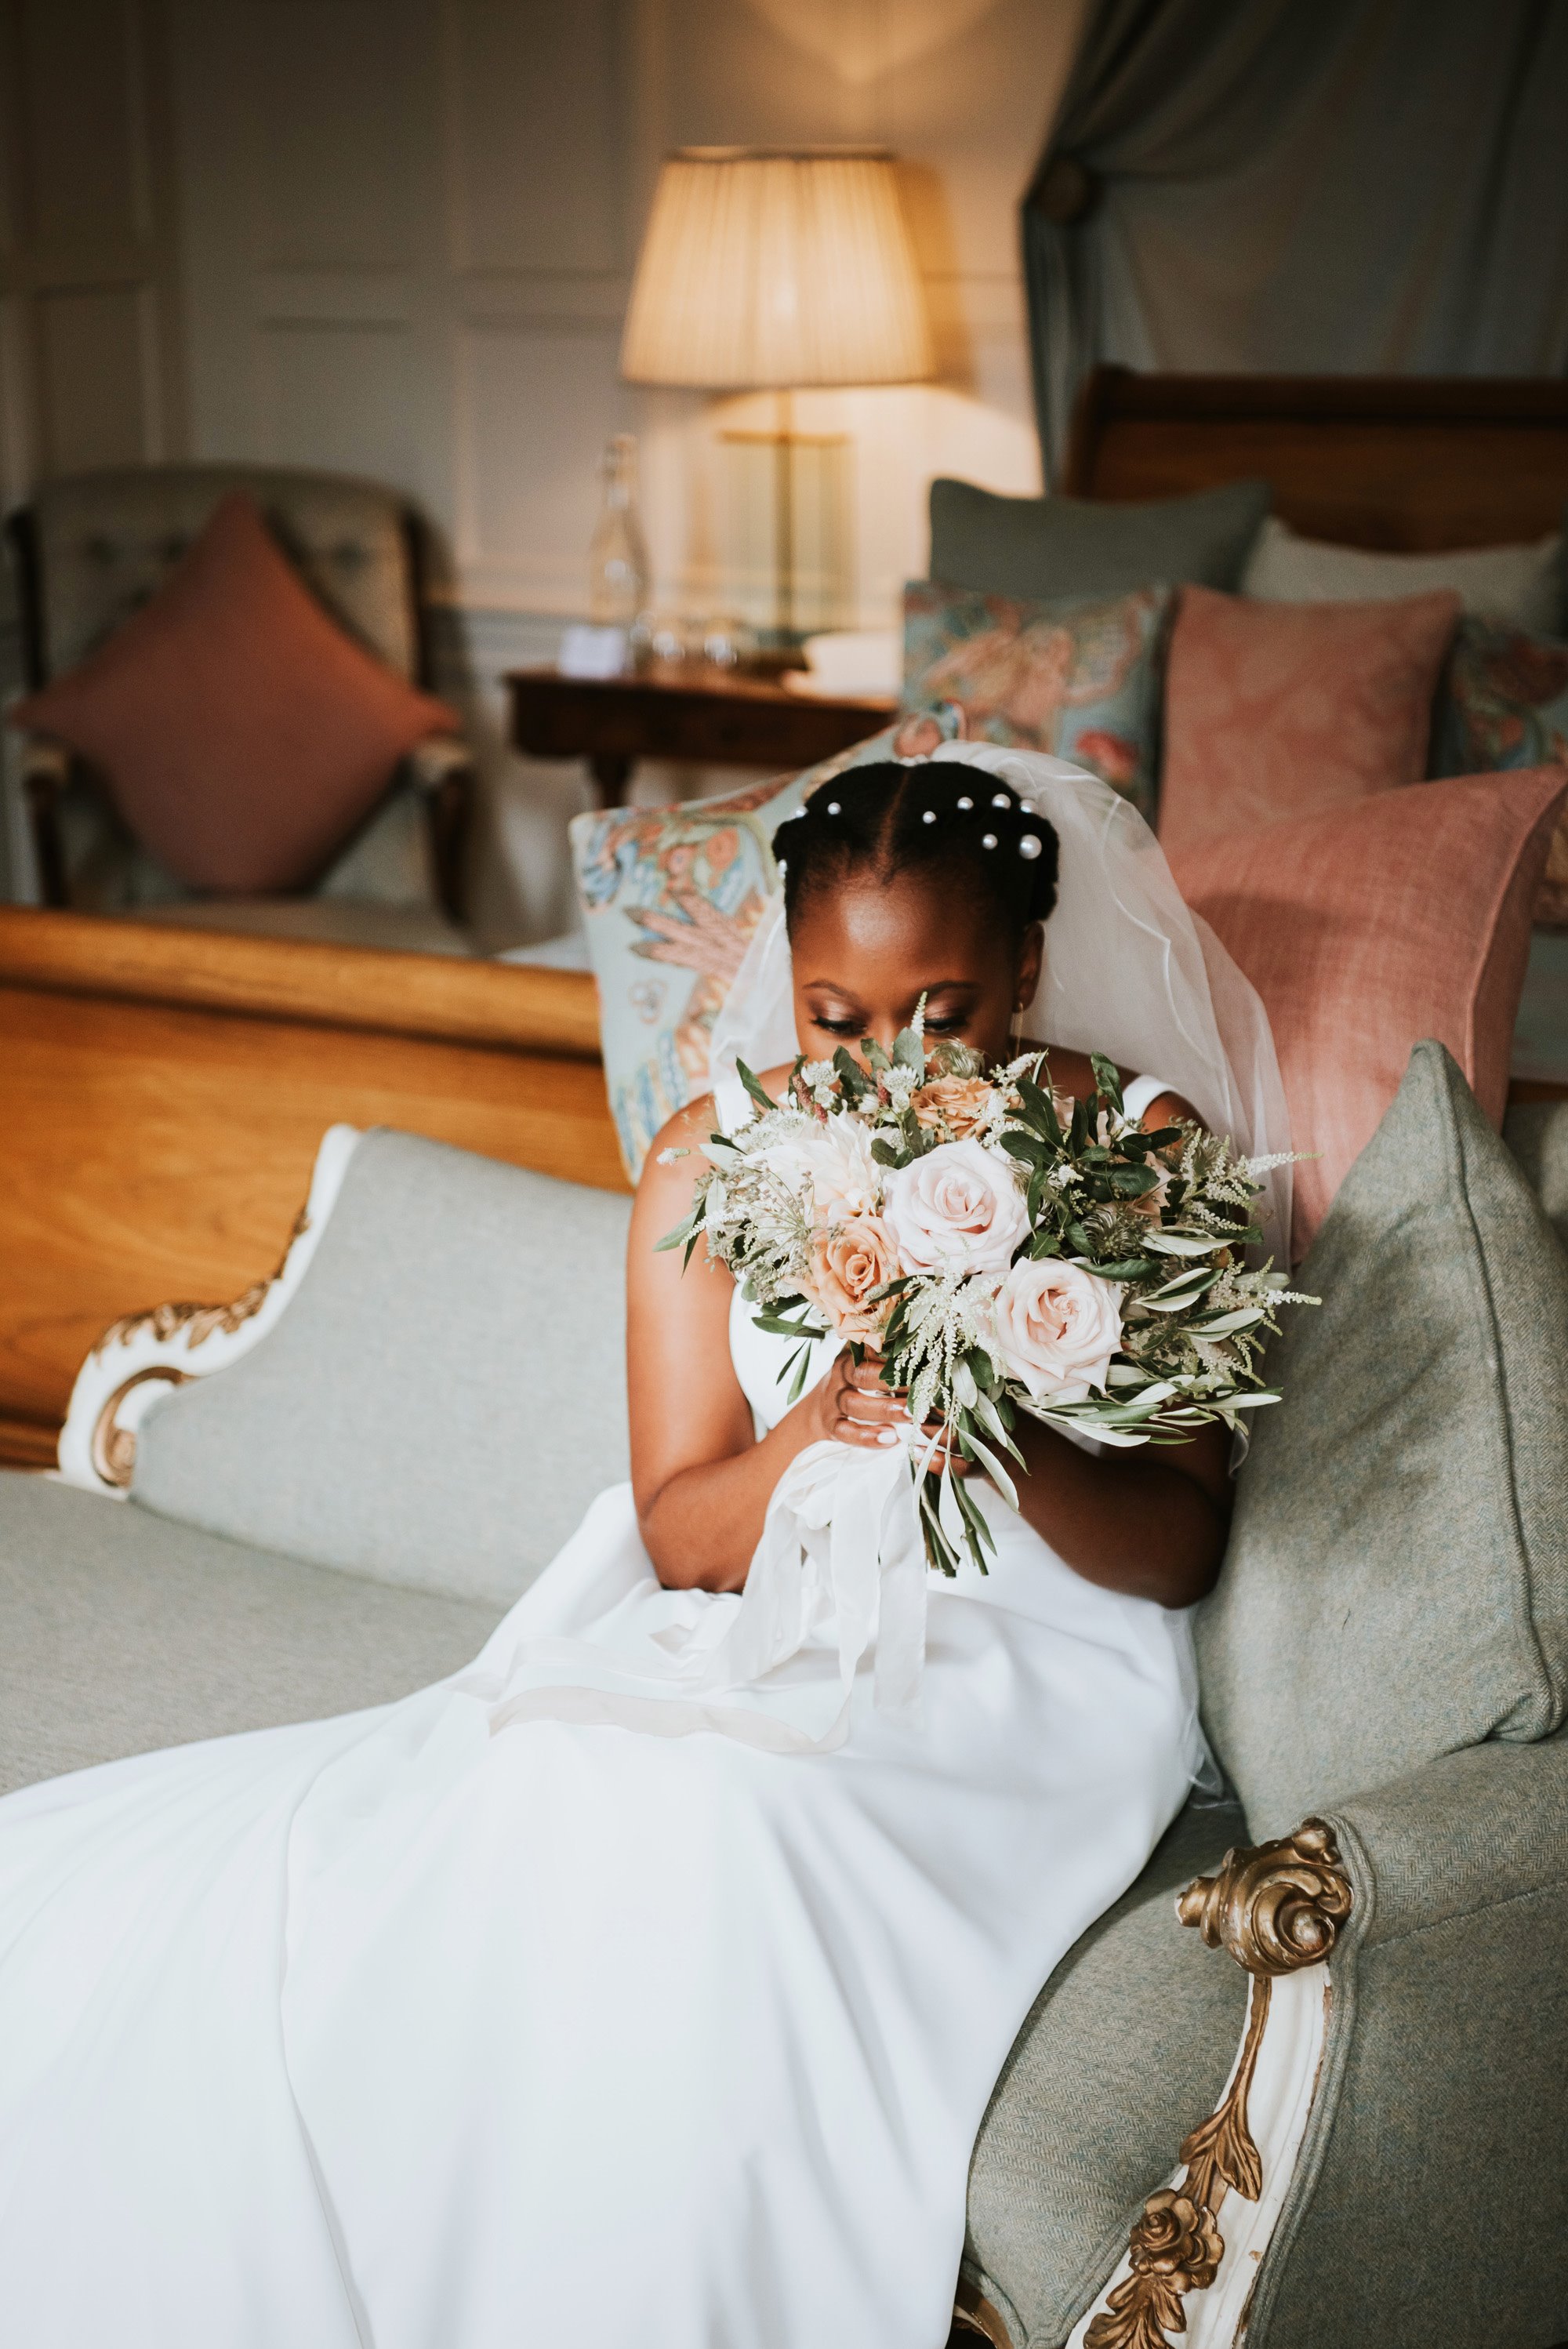 Bride sitting on chaise lounge in glamorous bridal suite of stately home pushes face into bouquet of blush pink and greenery